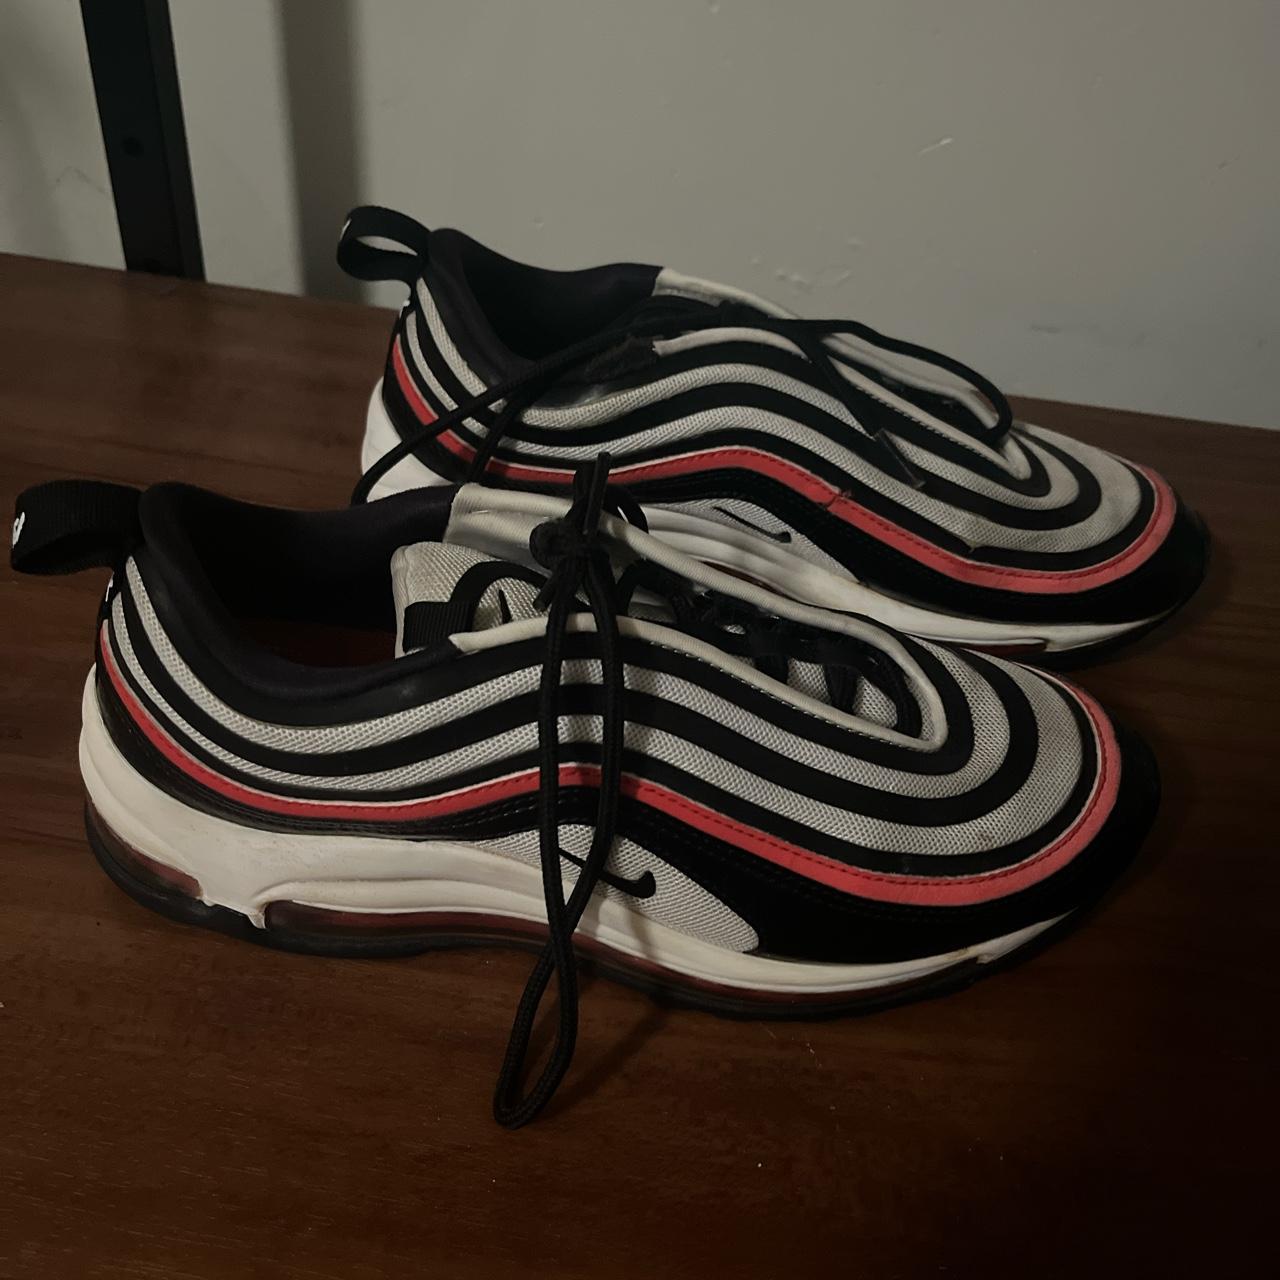 Product Image 3 - Nike Air Max 97

Size 8